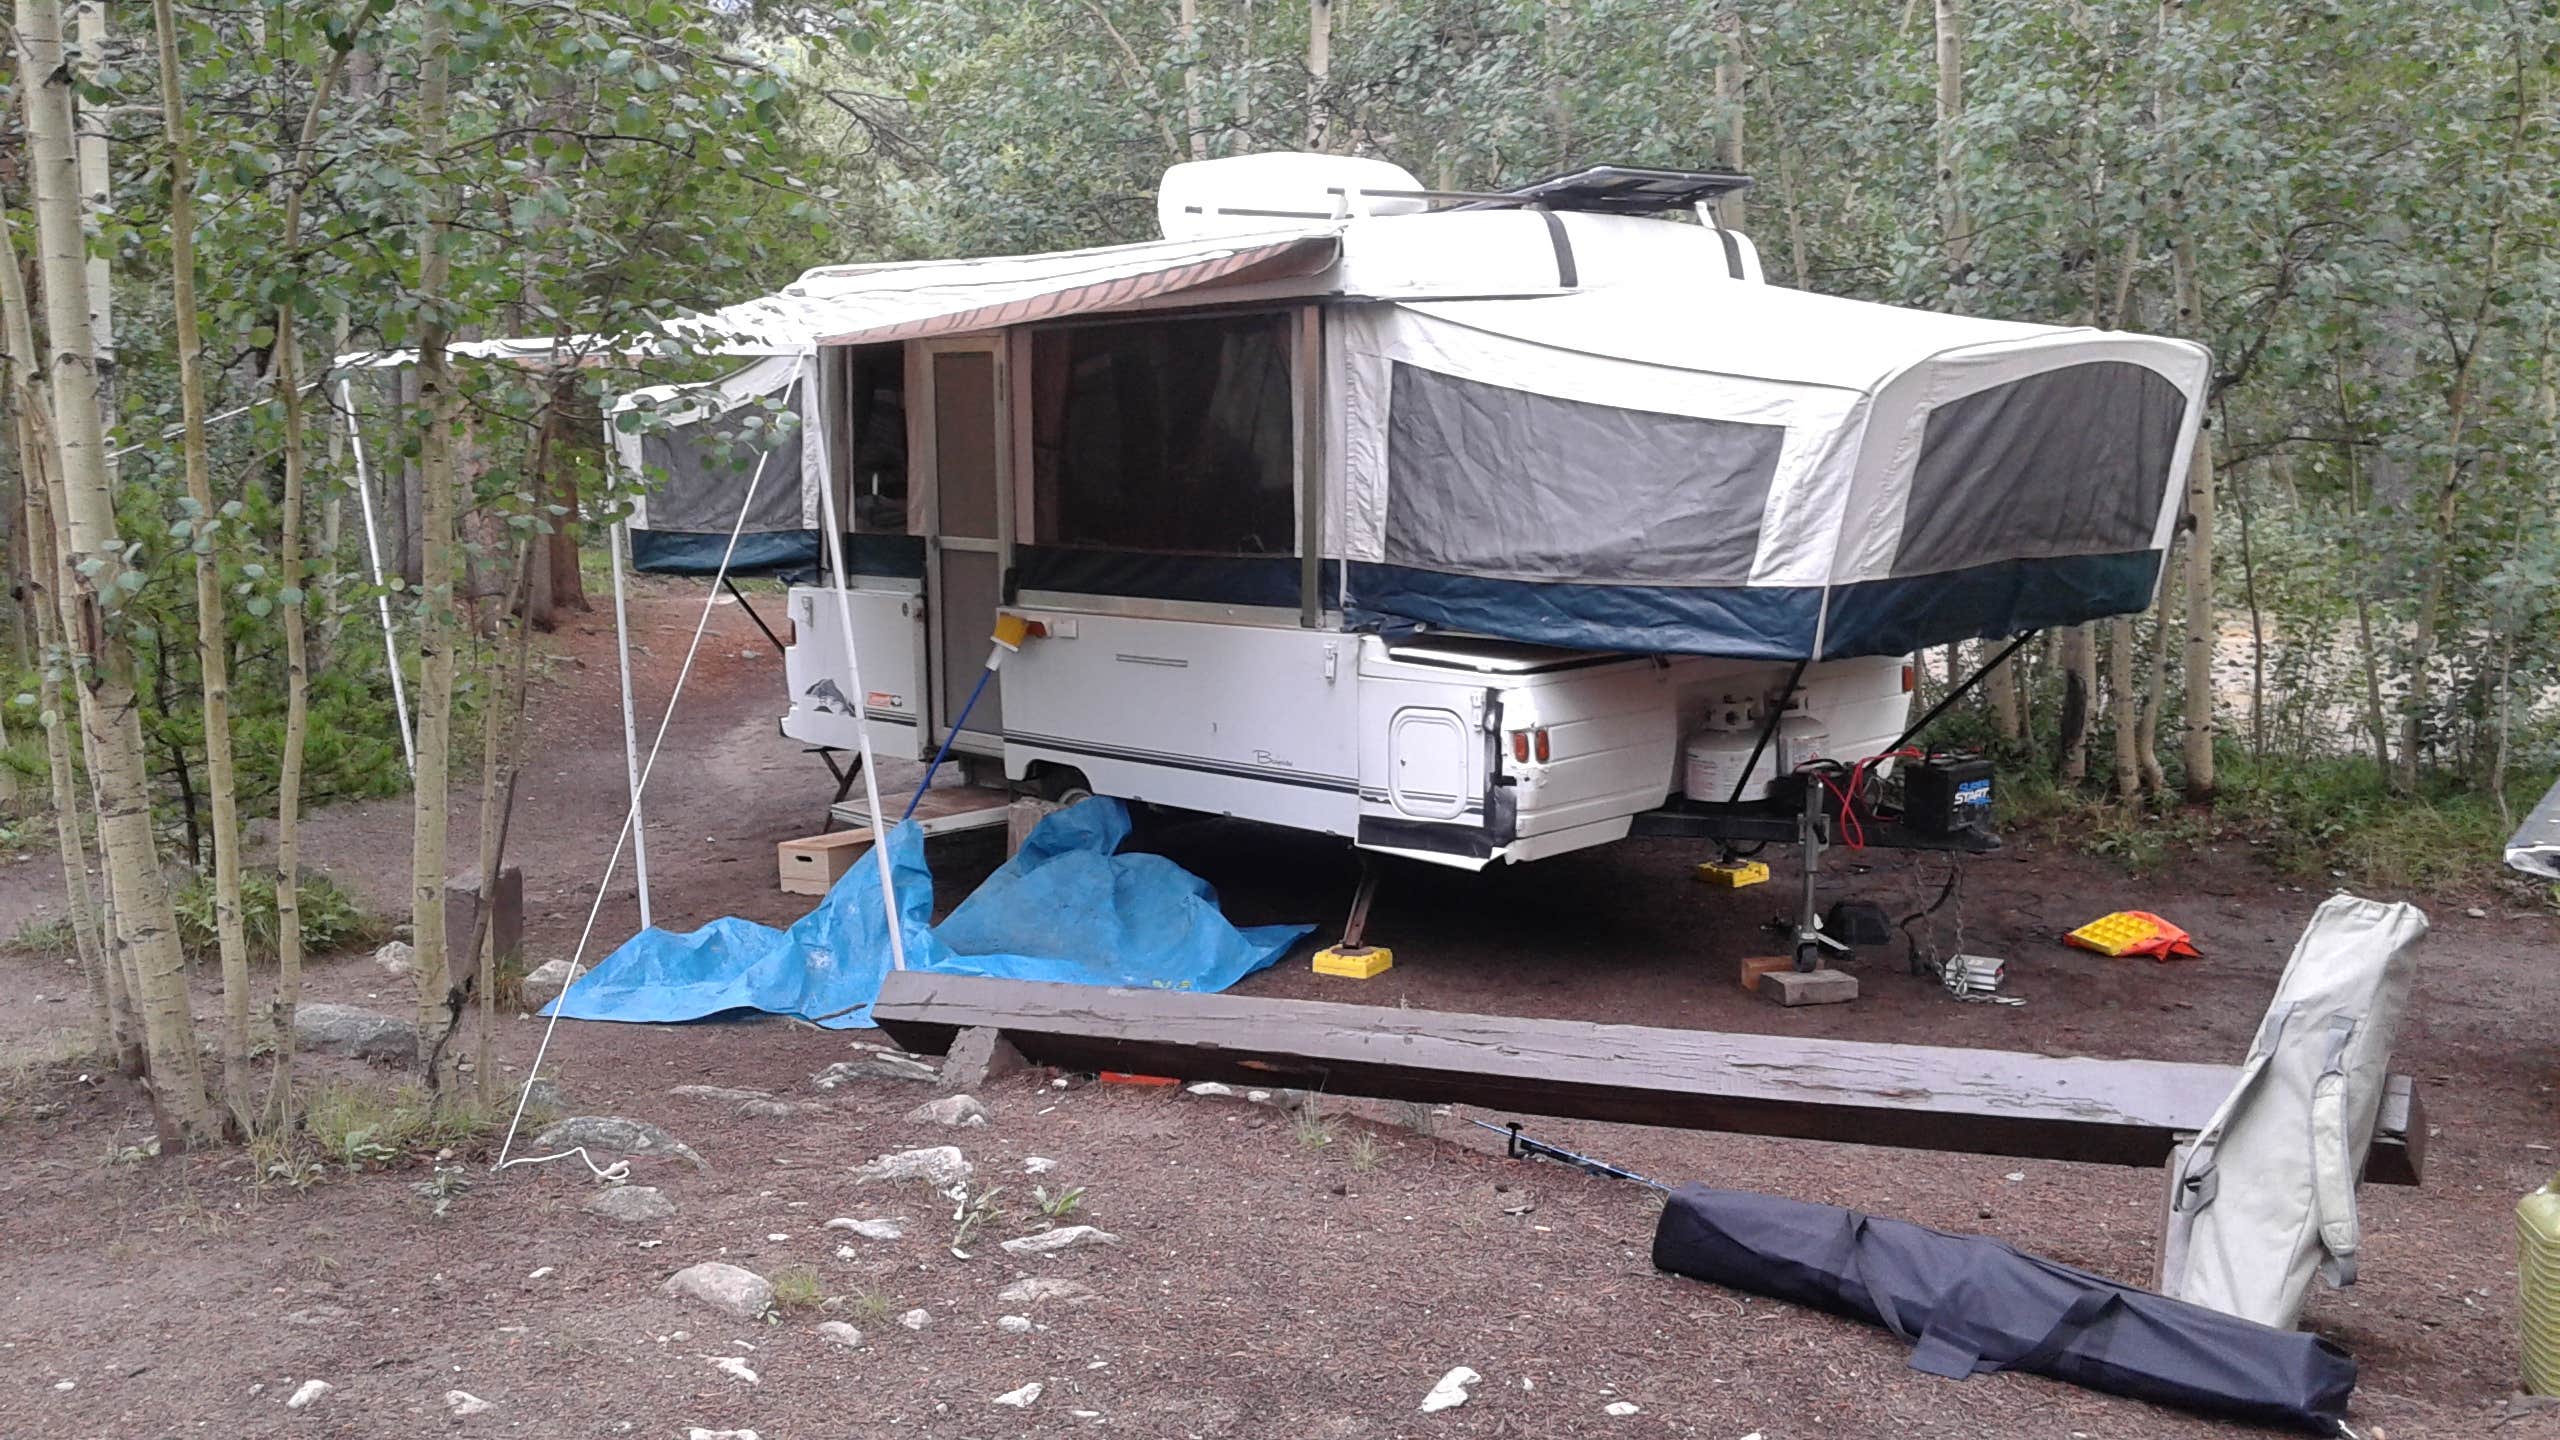 Camper submitted image from Collegiate Peaks - 5